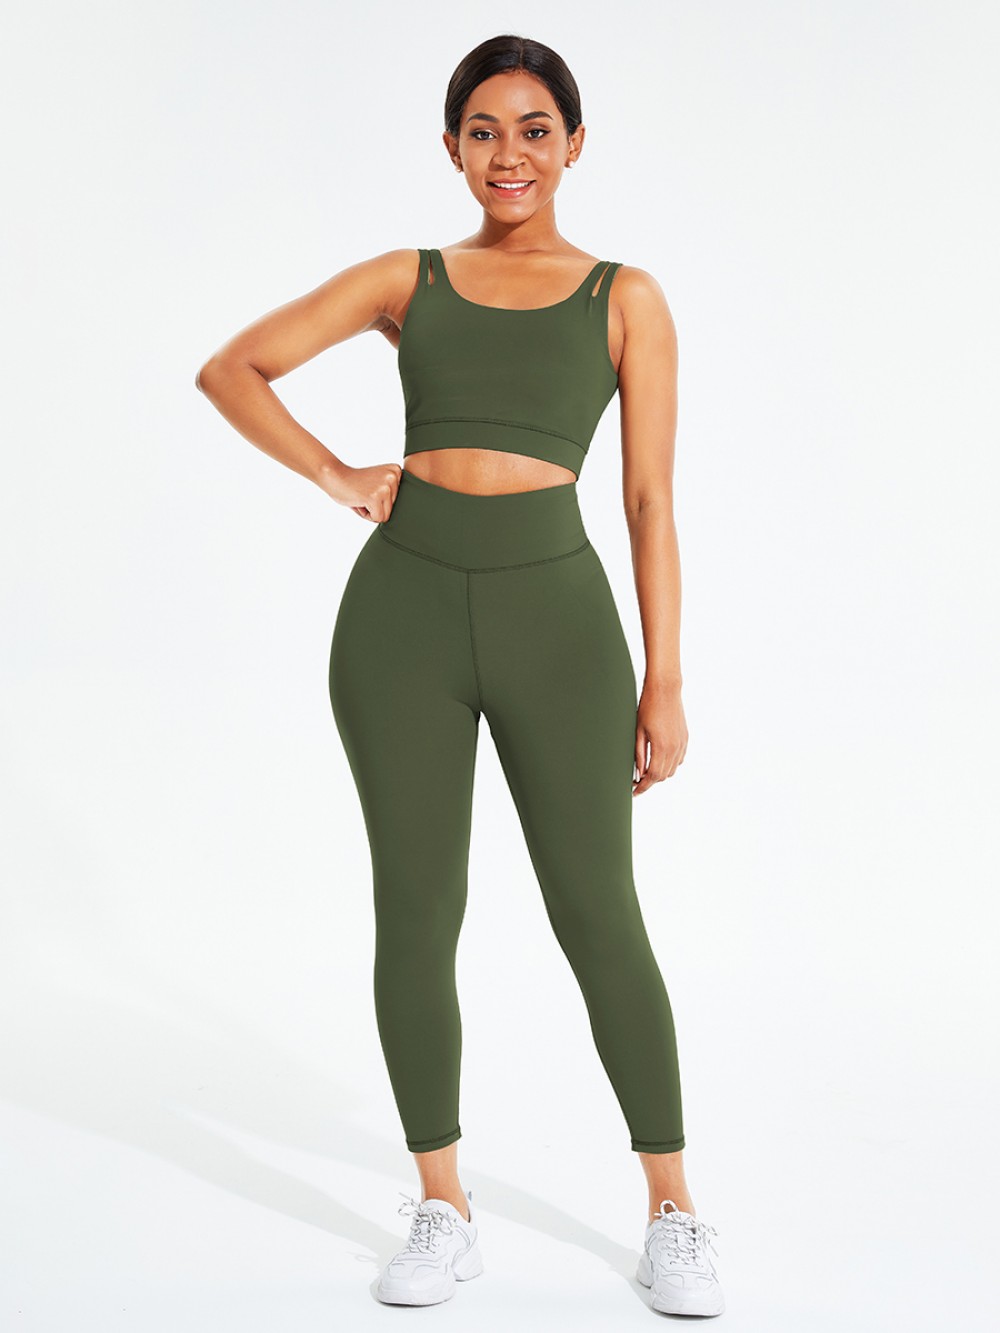 Army Green Hollow Out Full Length Pocket Athletic Suit For Training